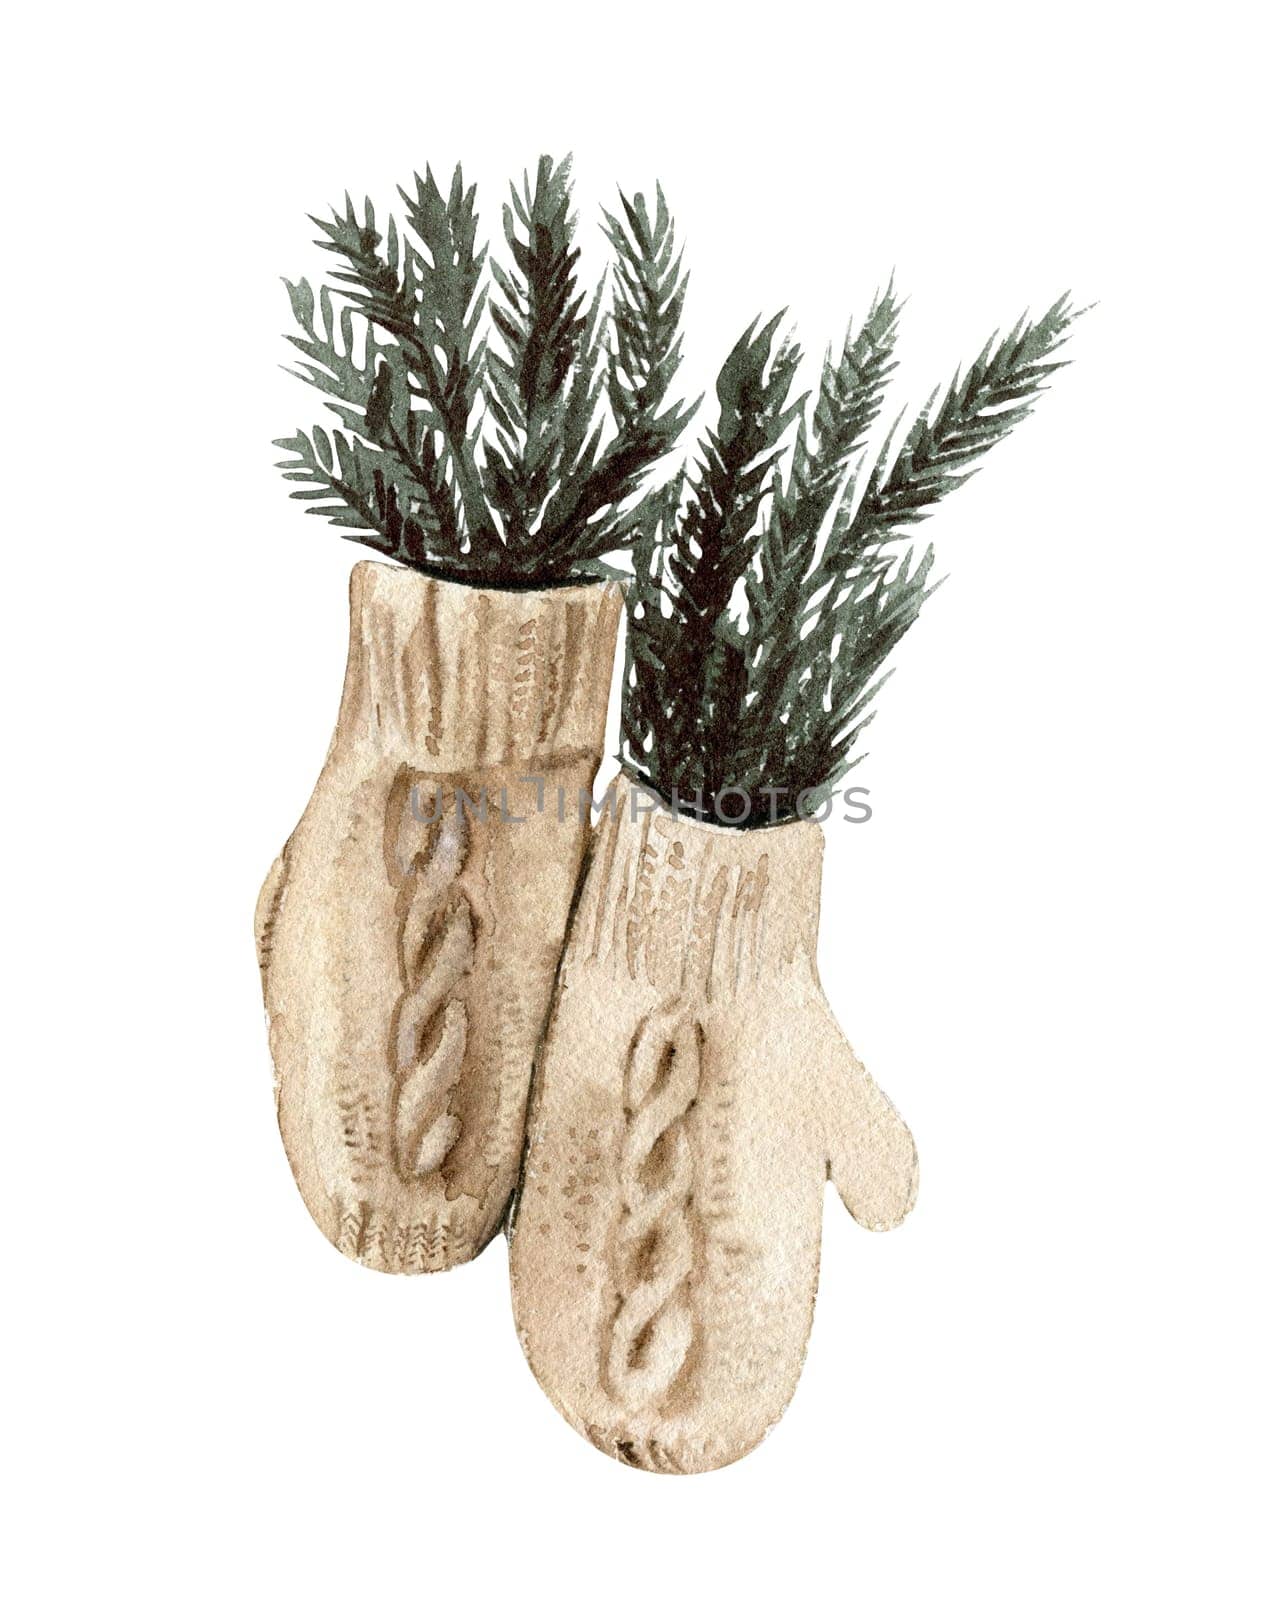 Сhristmas fir branches in mittens for decoration. Watercolor hand drawn illustration.